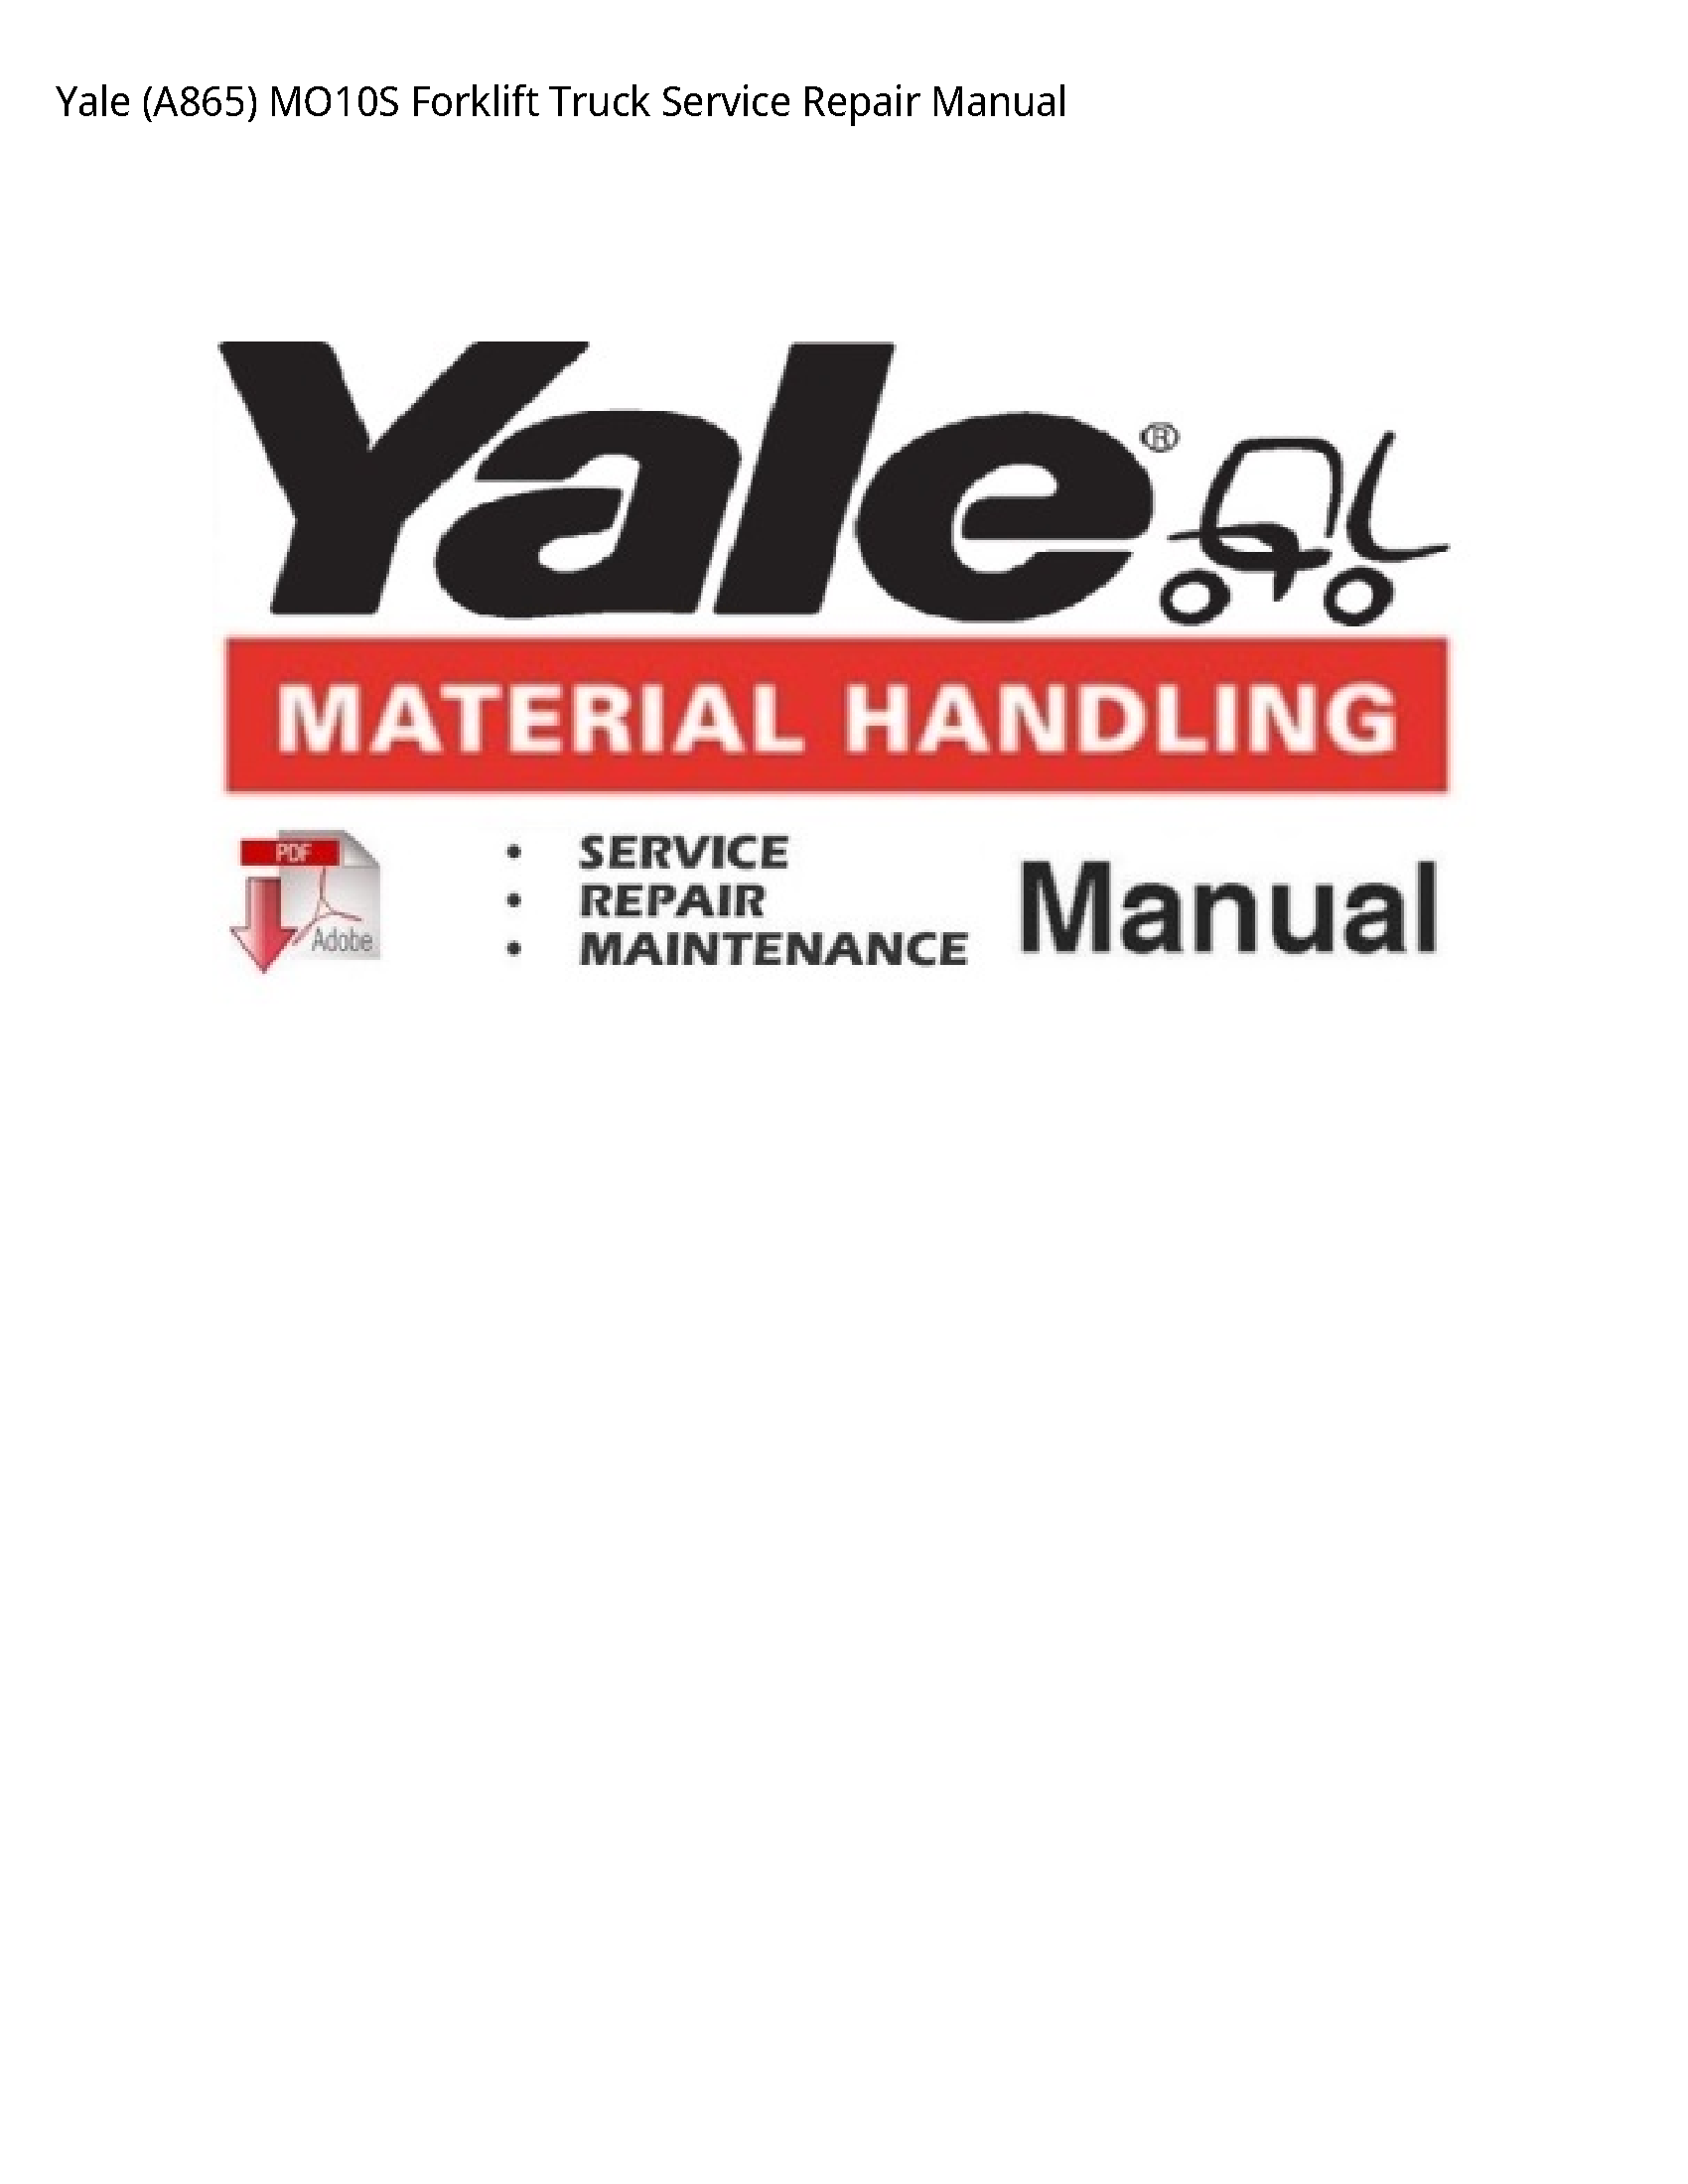 Yale (A865) Forklift Truck manual